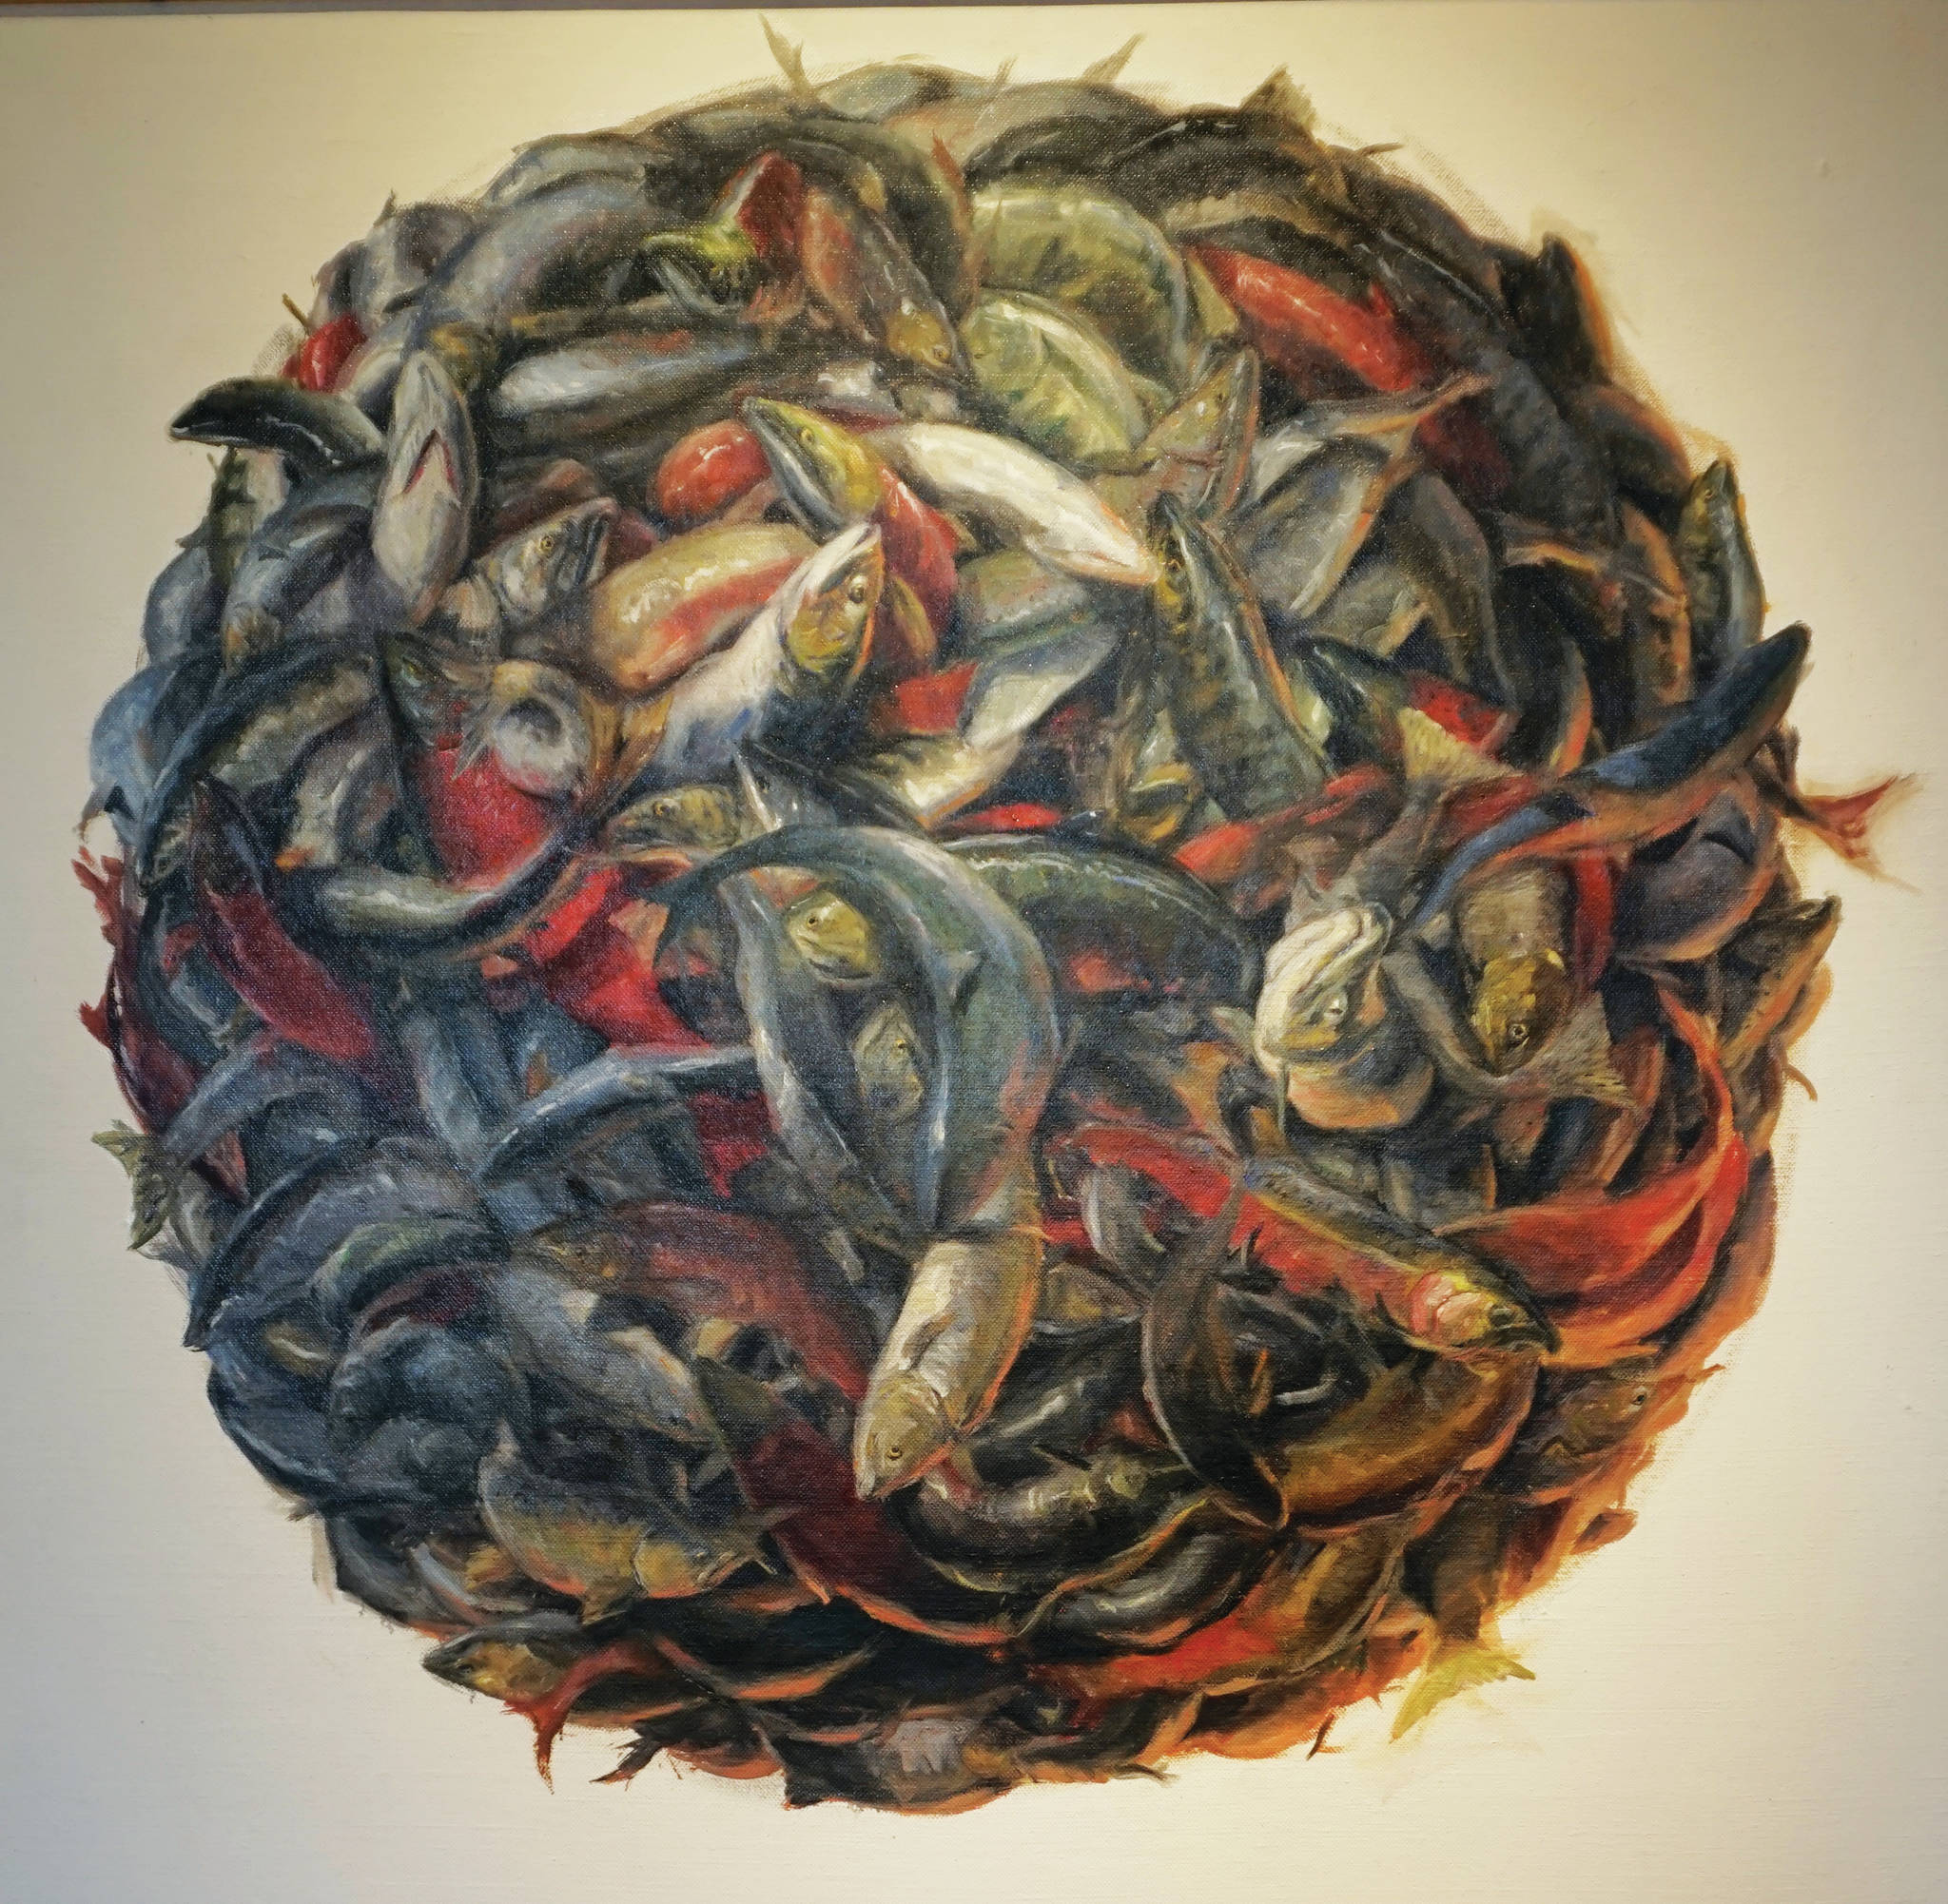 David Pettibone’s “Harvest,” as seen on July 7, 2020, at Bunnell Street Arts Center in Homer, Alaska. (Photo by Michael Armstrong/Homer News)